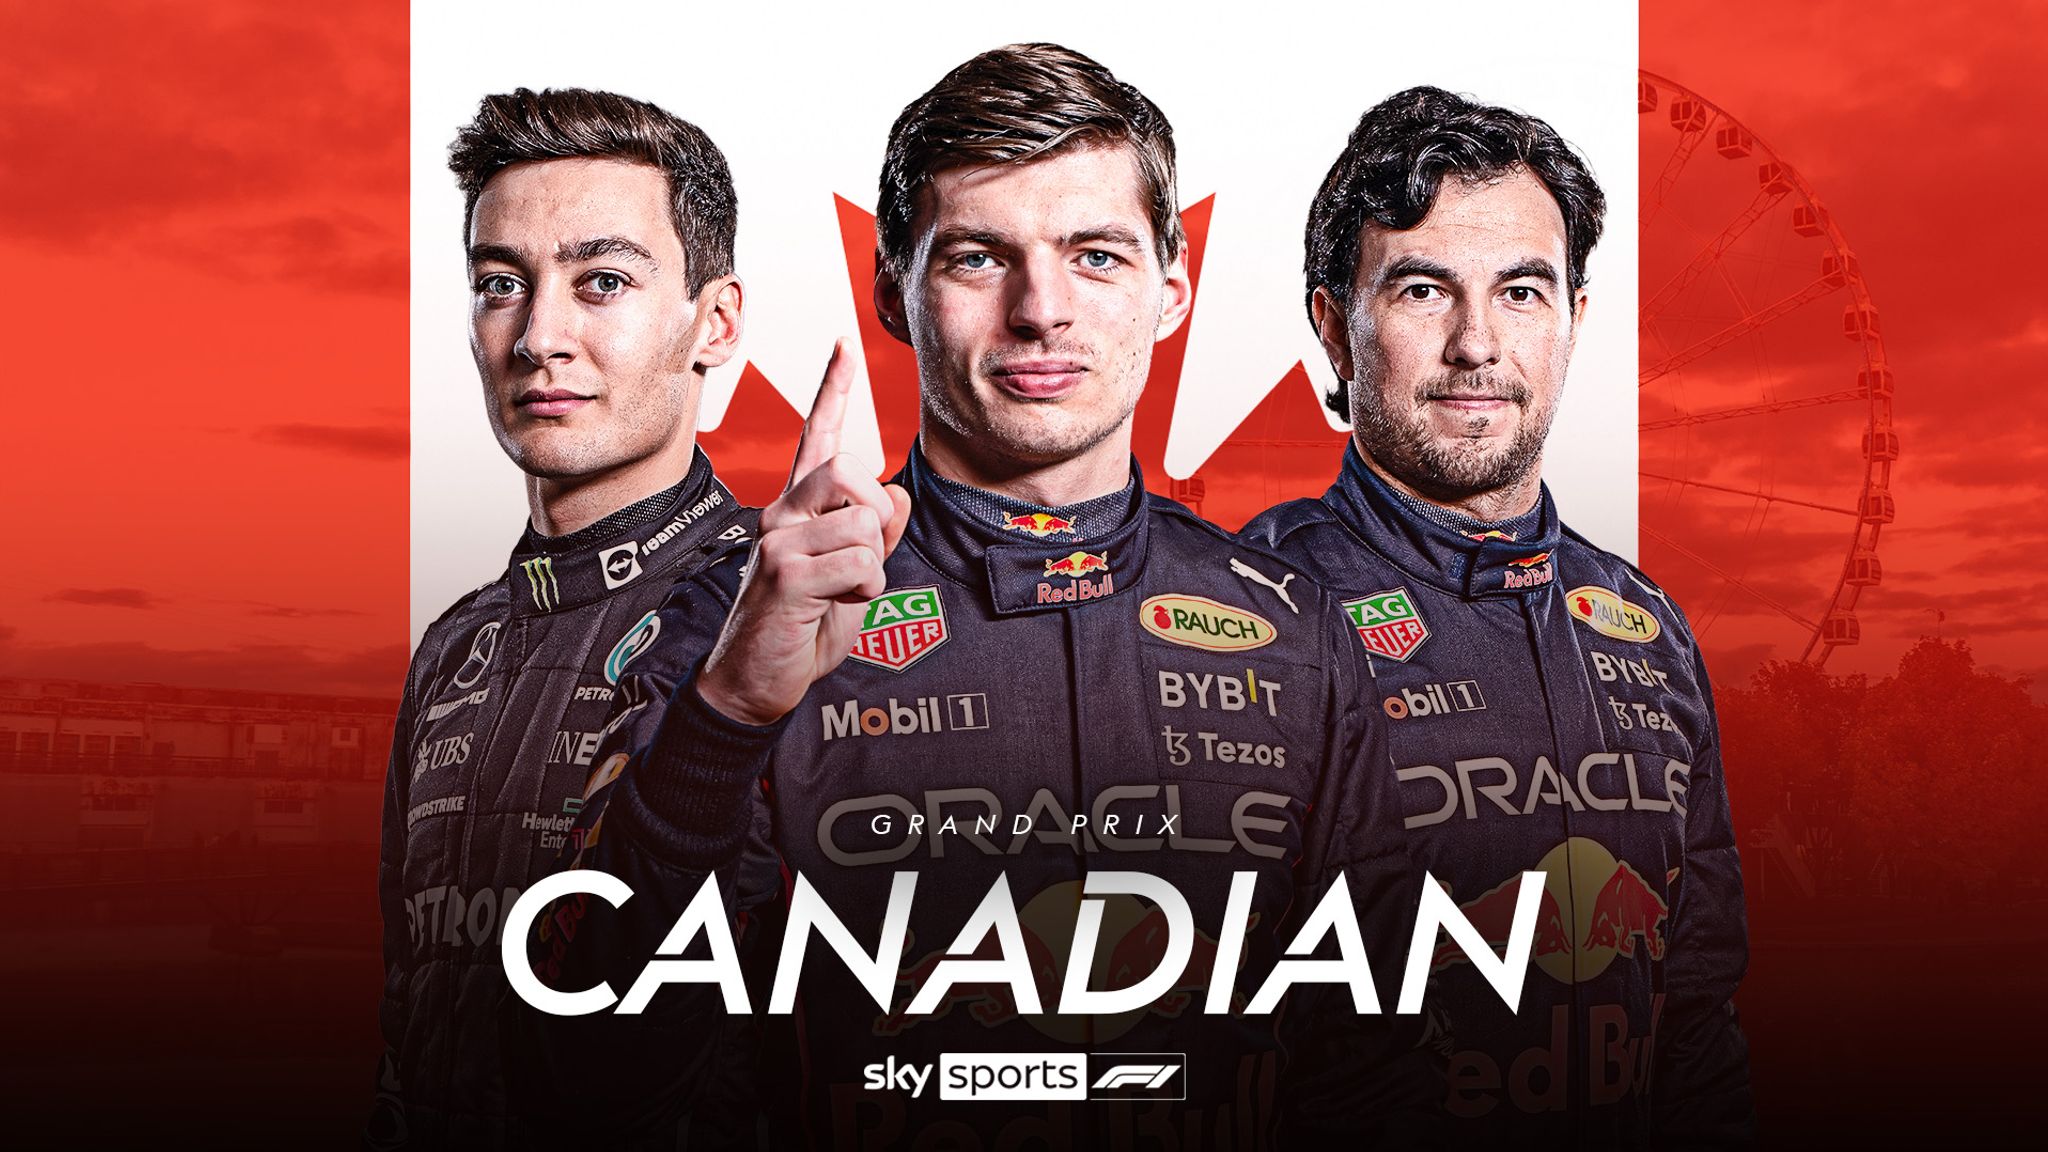 Canadian Grand Prix When is the race in Montreal, live on Sky Sports? F1 News